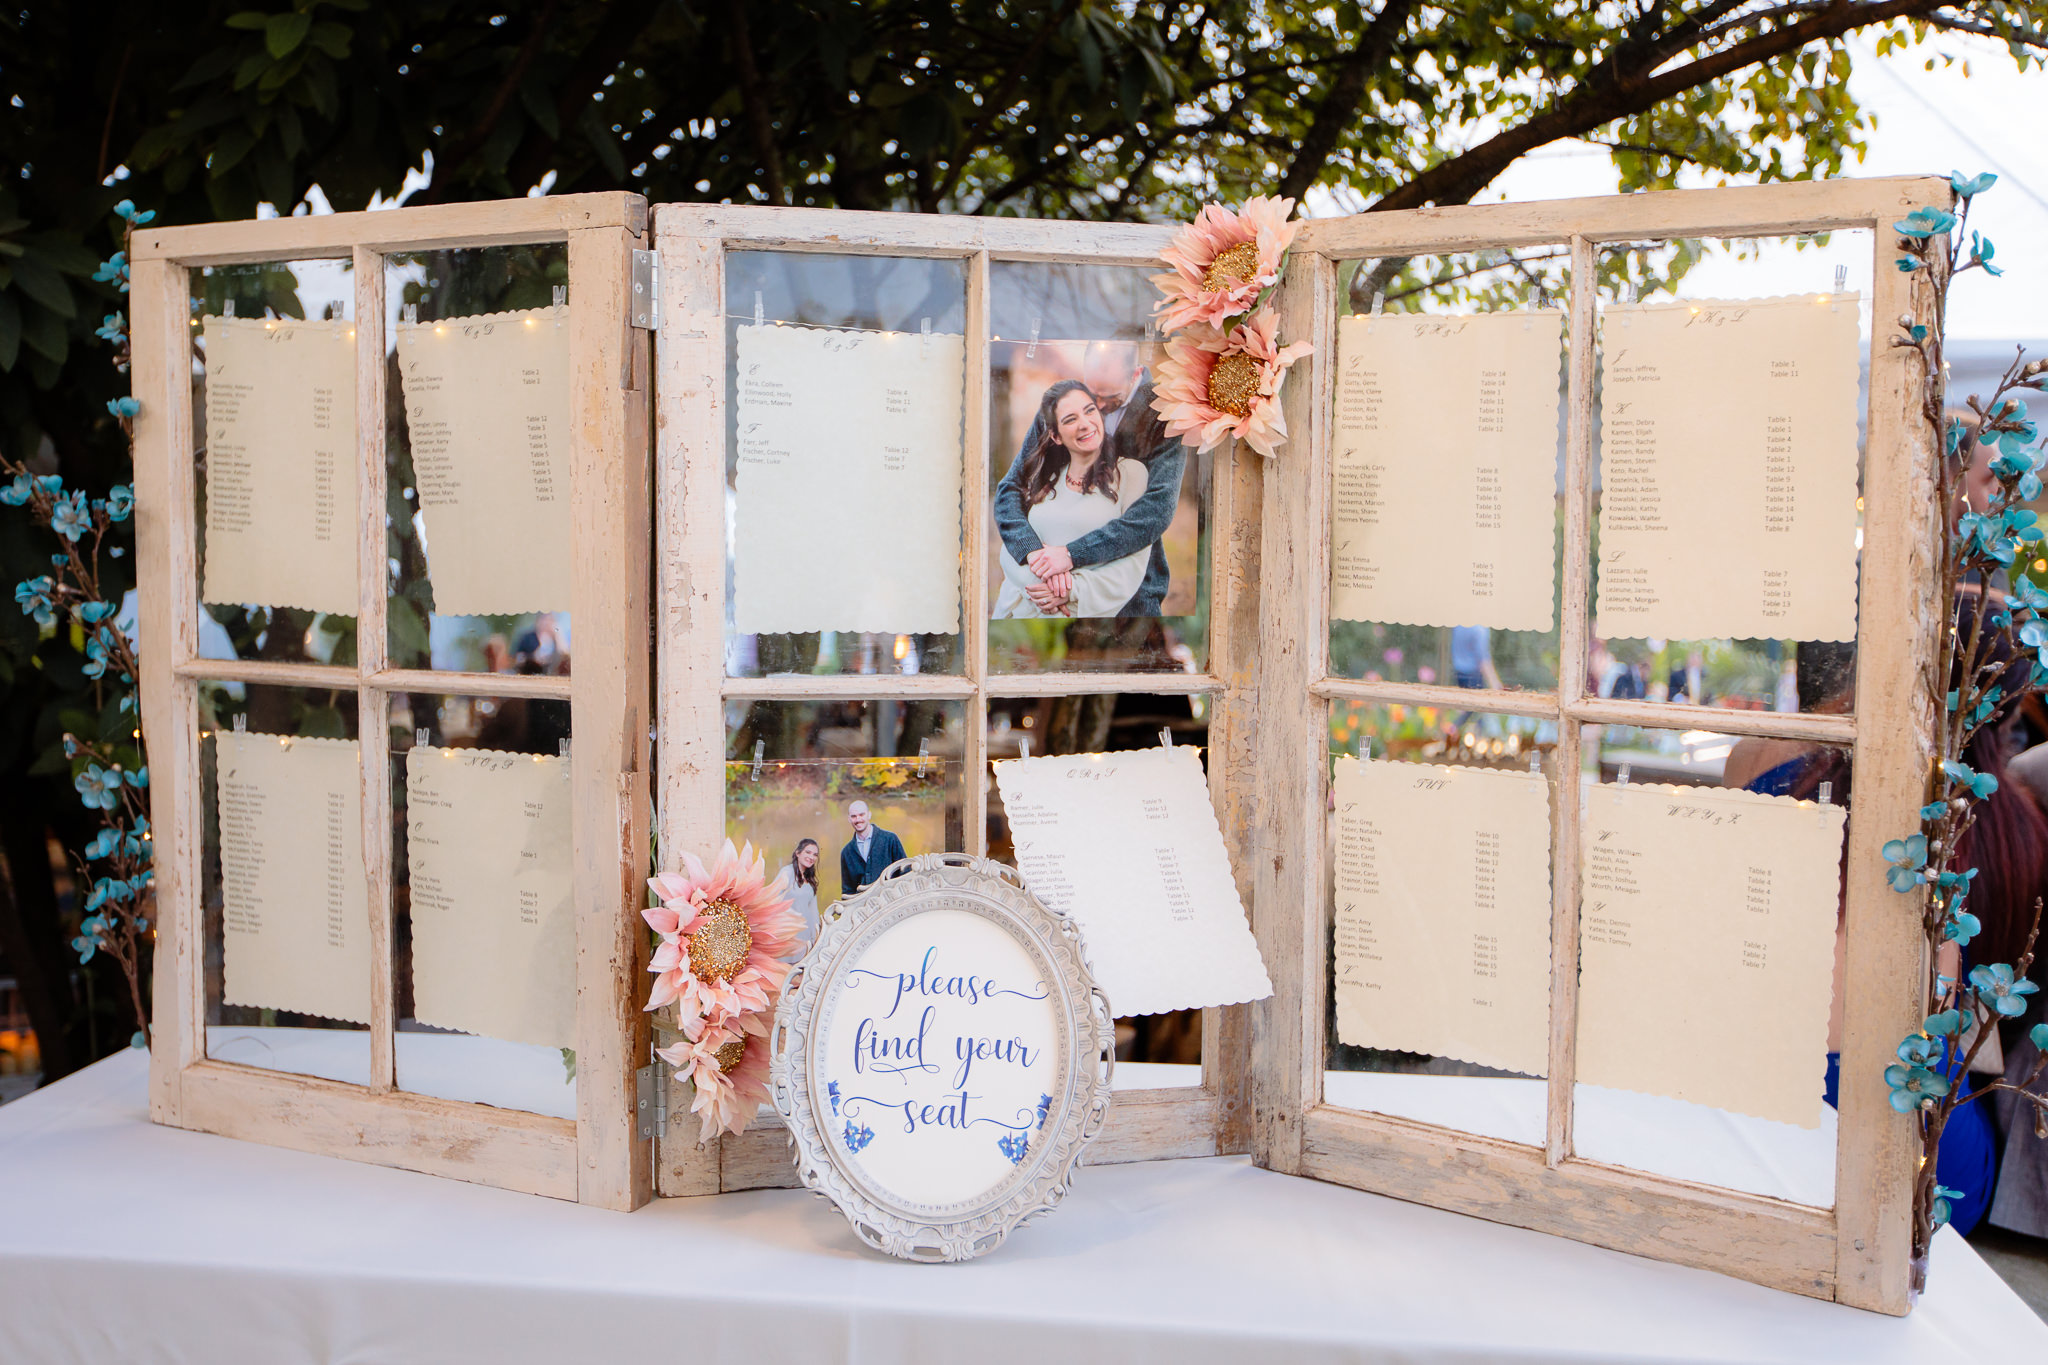 Seating chart on weathered glass window panes at a National Aviary wedding